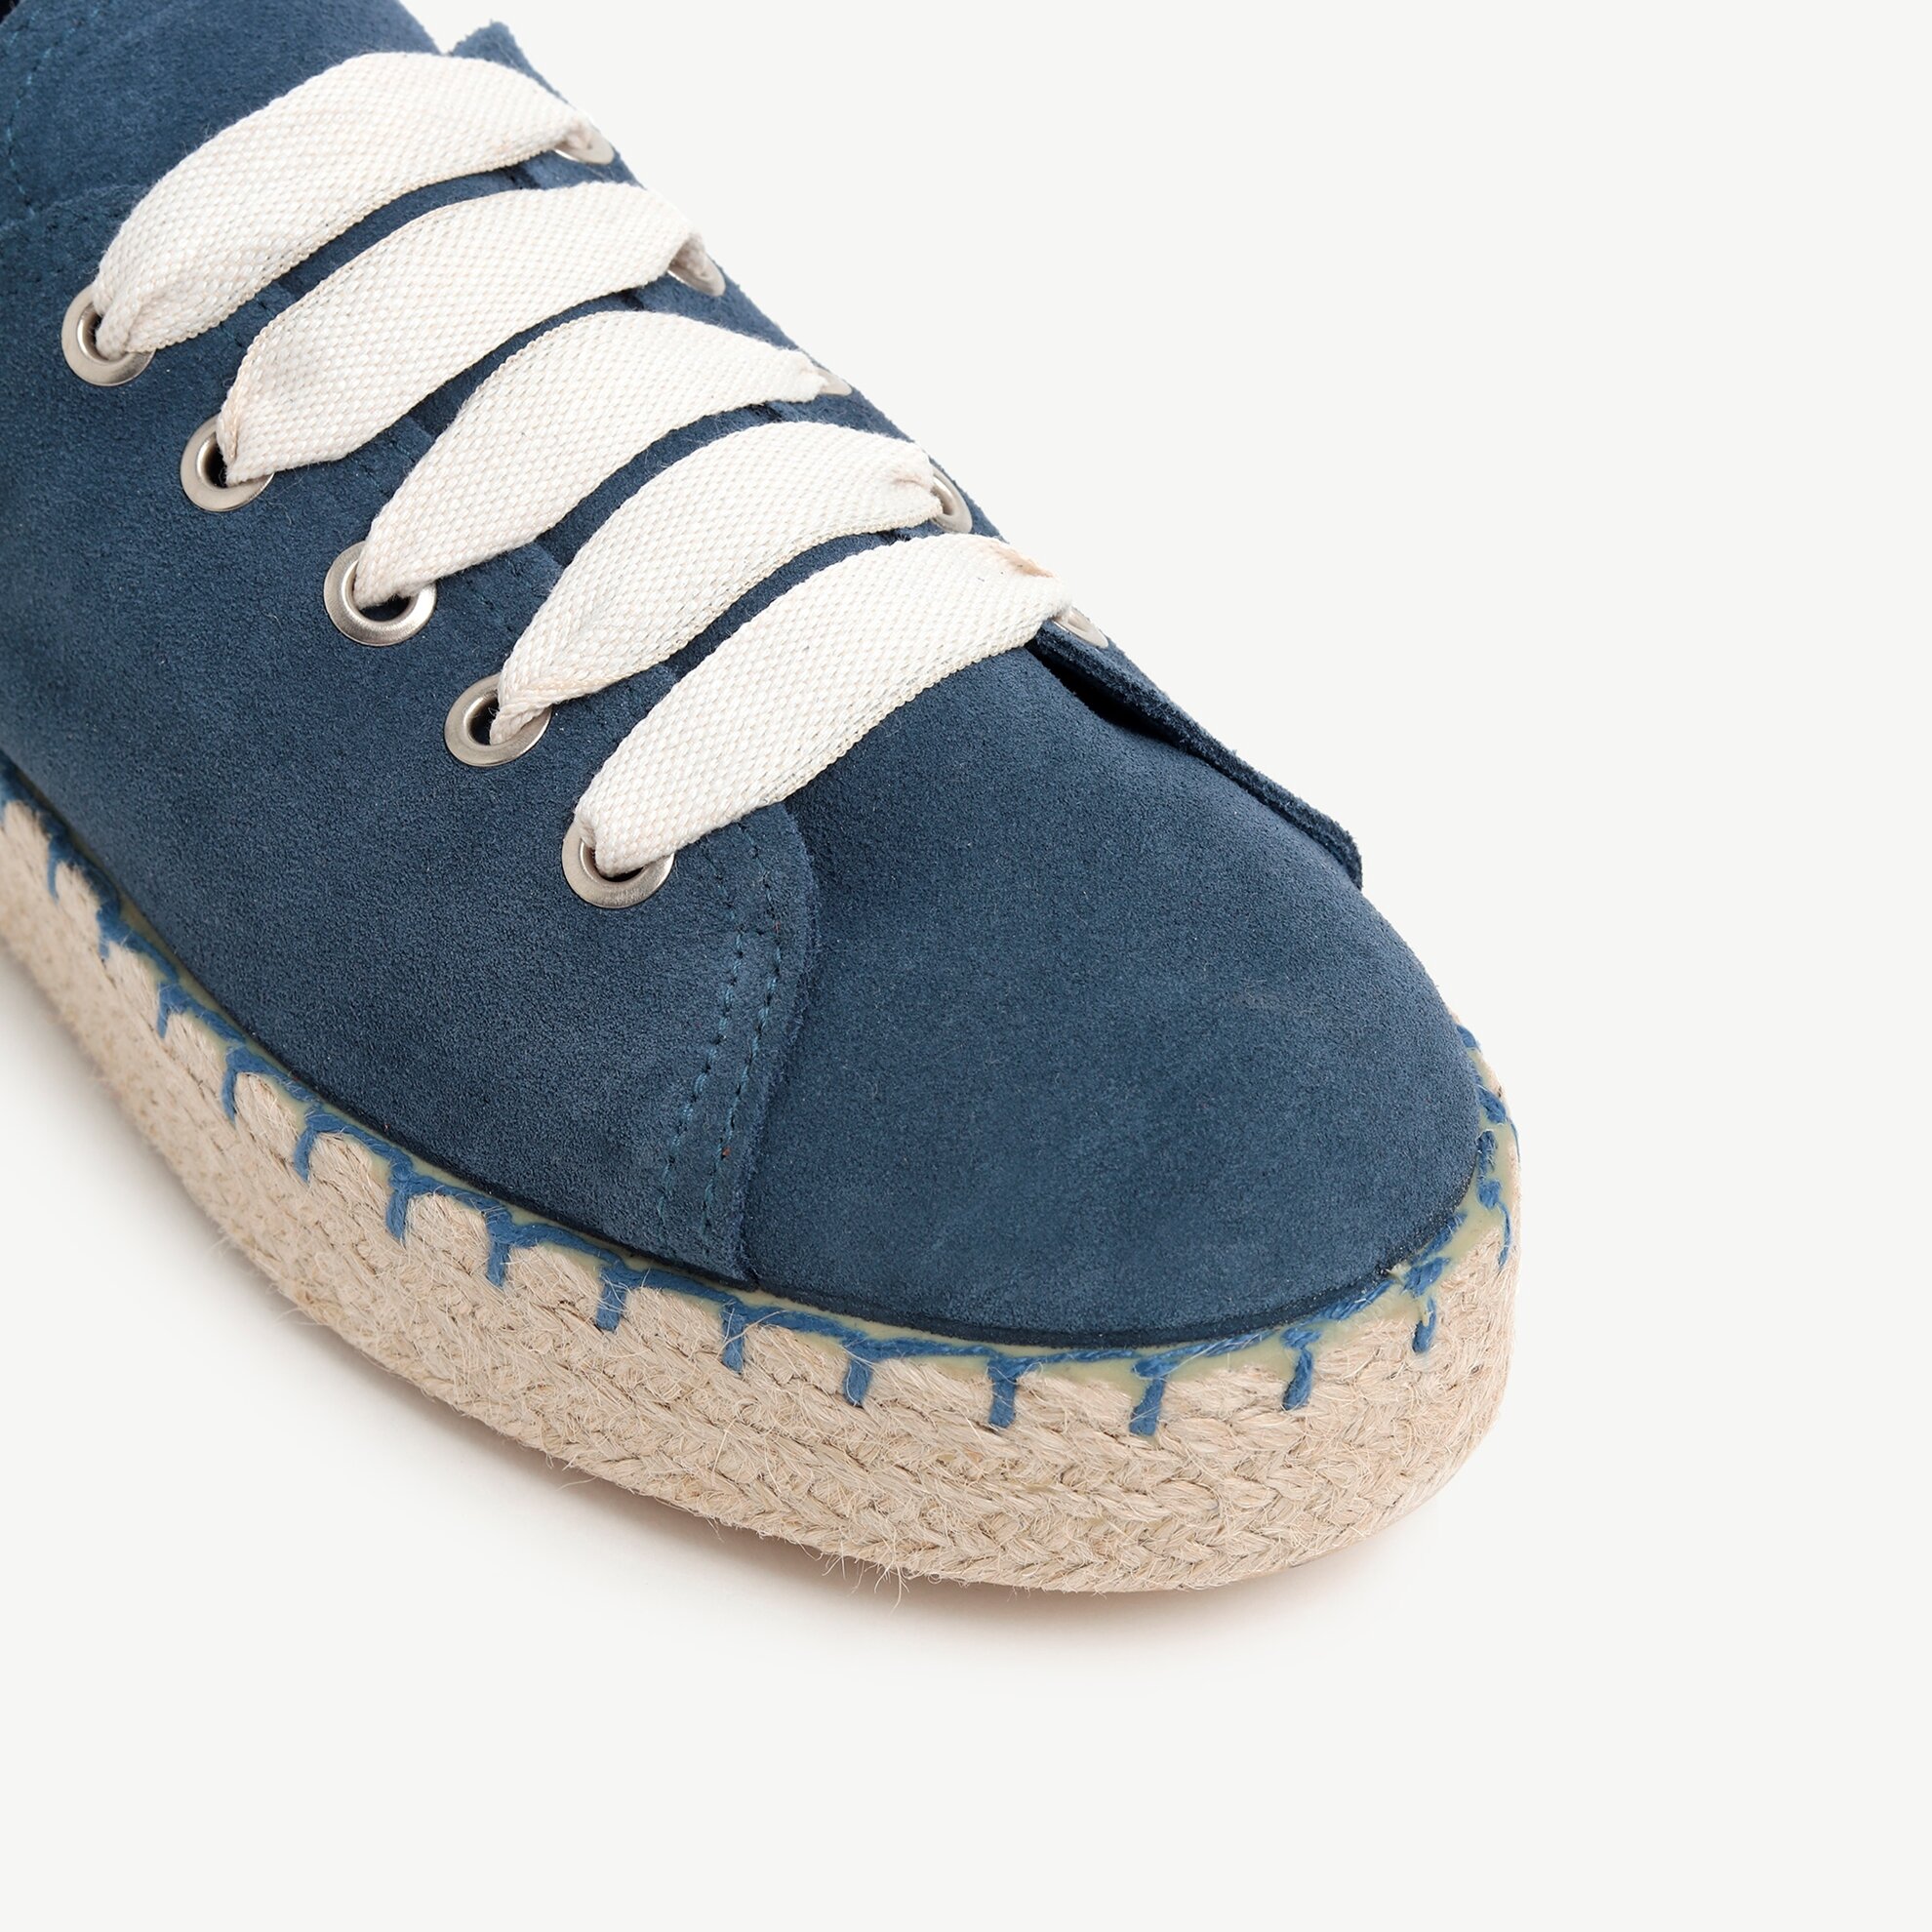 Suede Leather Sneaker With Jute Woven Outsole